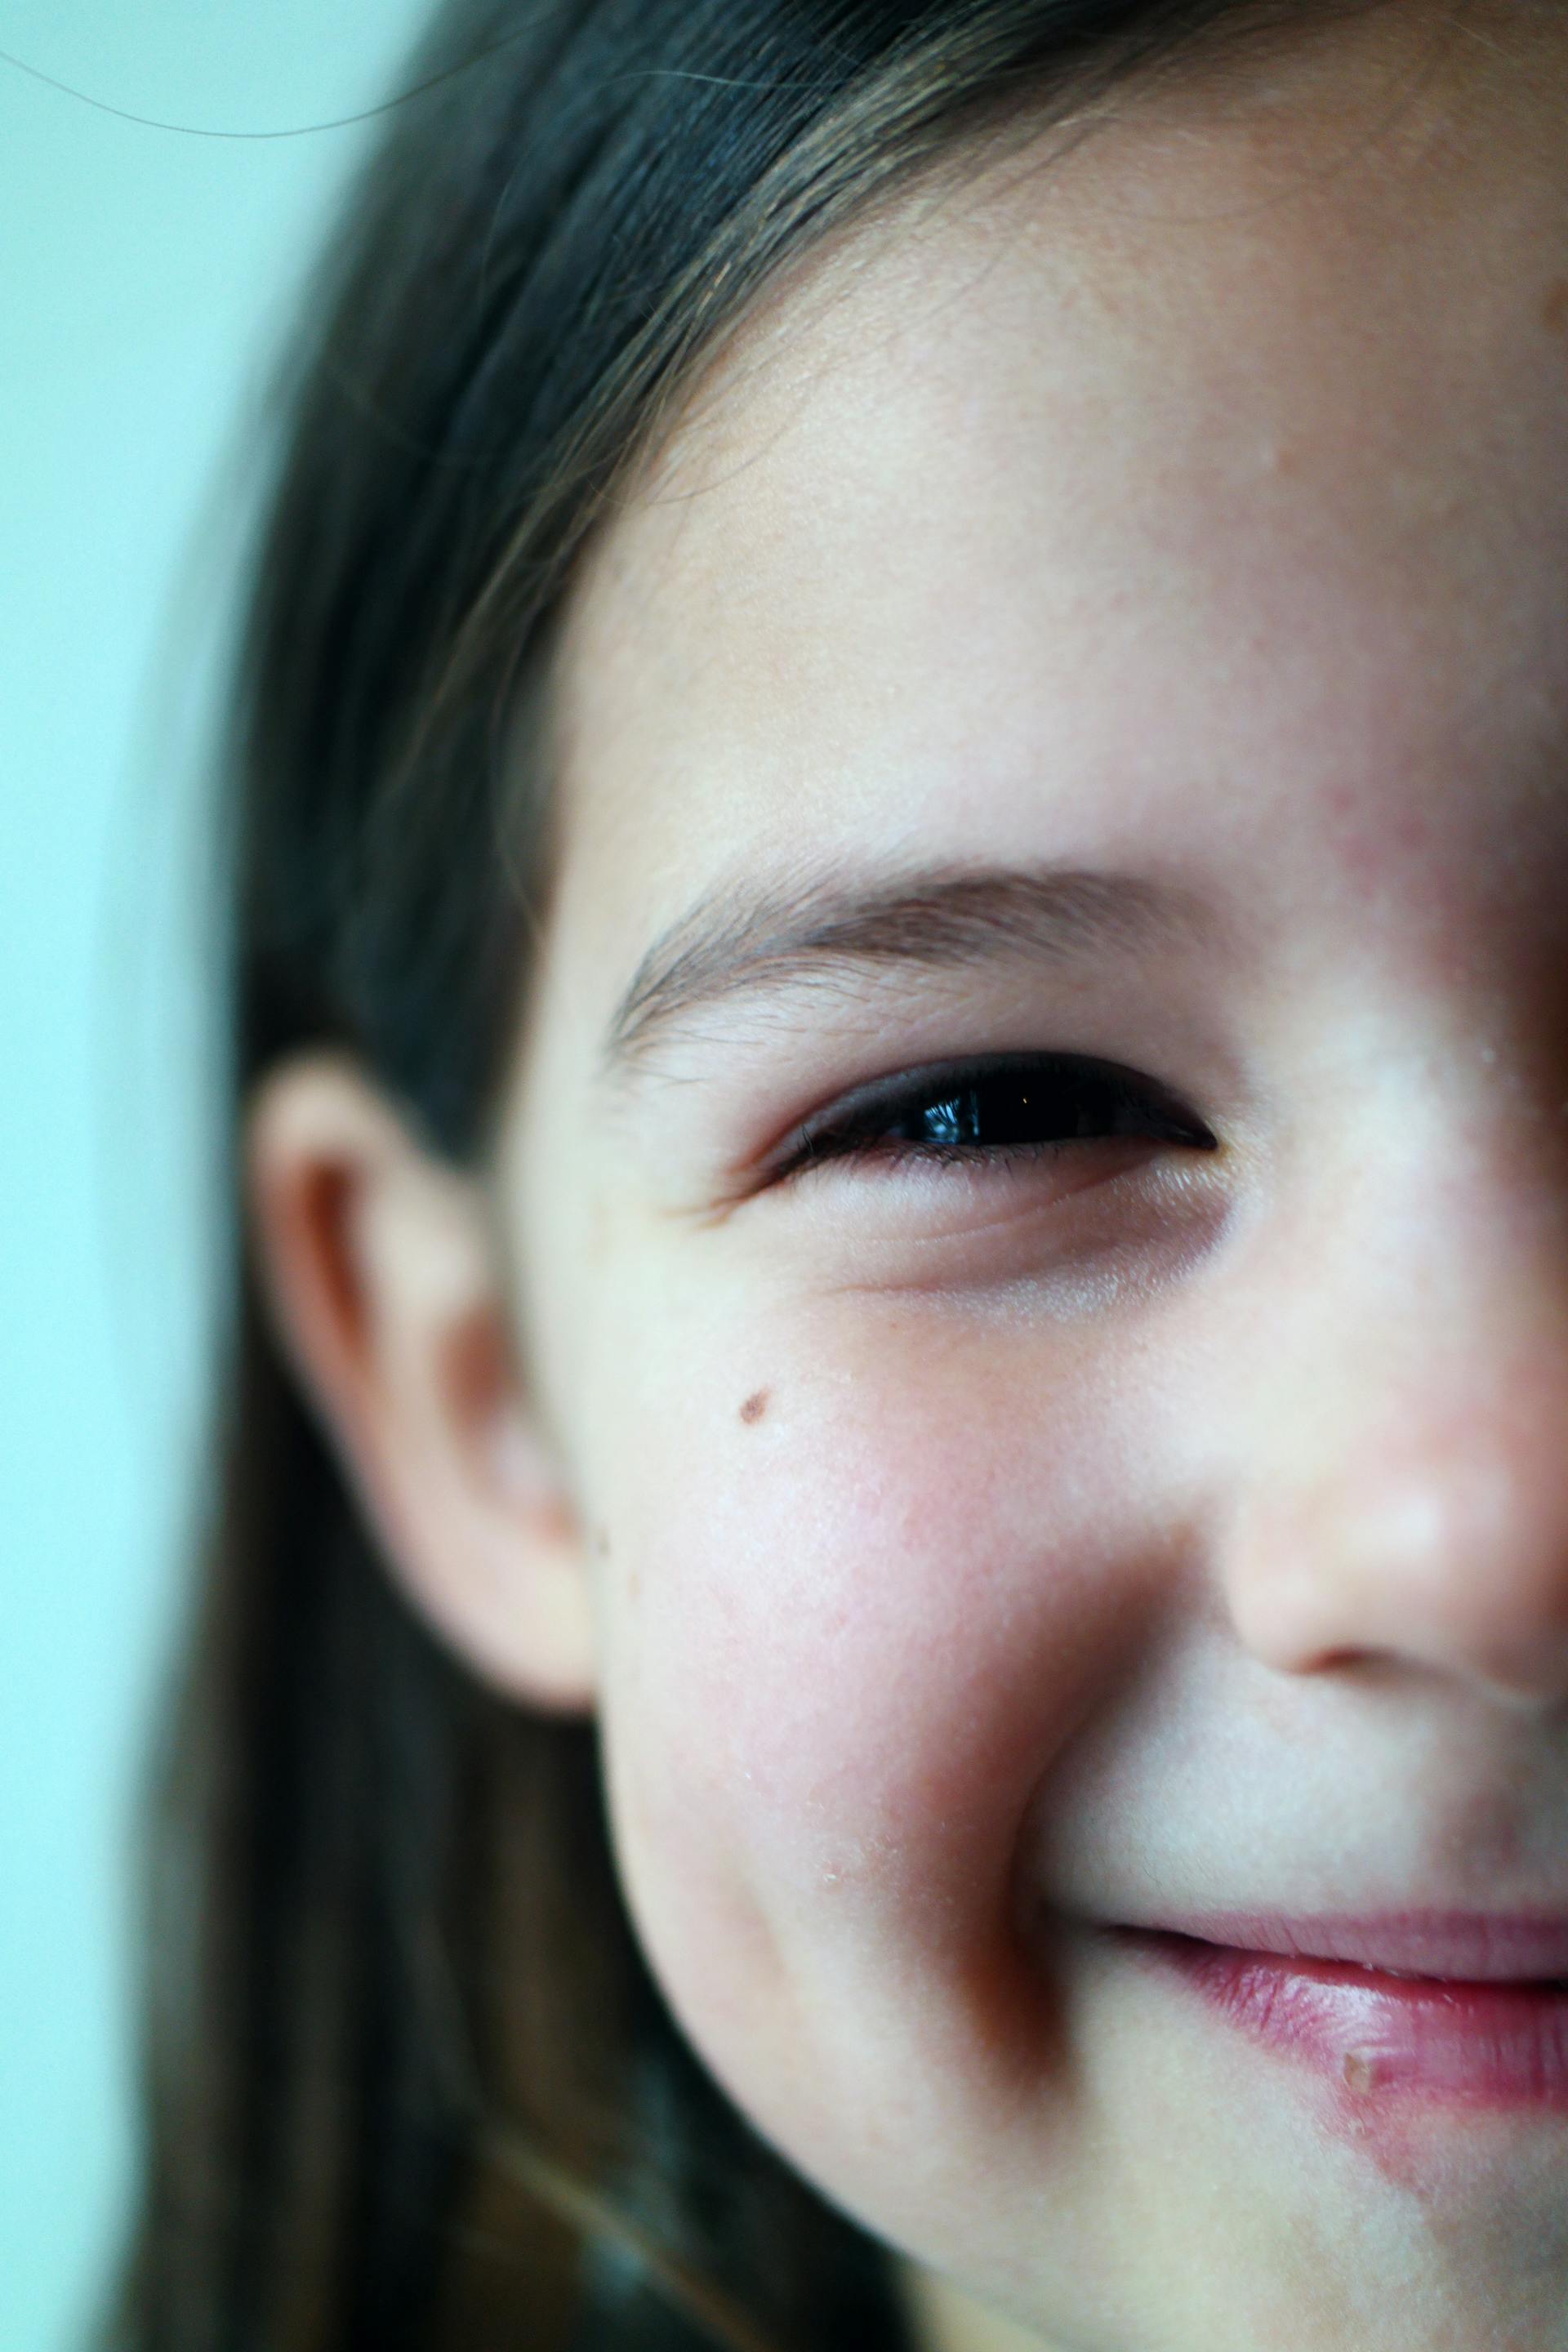 A smiling little girl | Source: Pexels